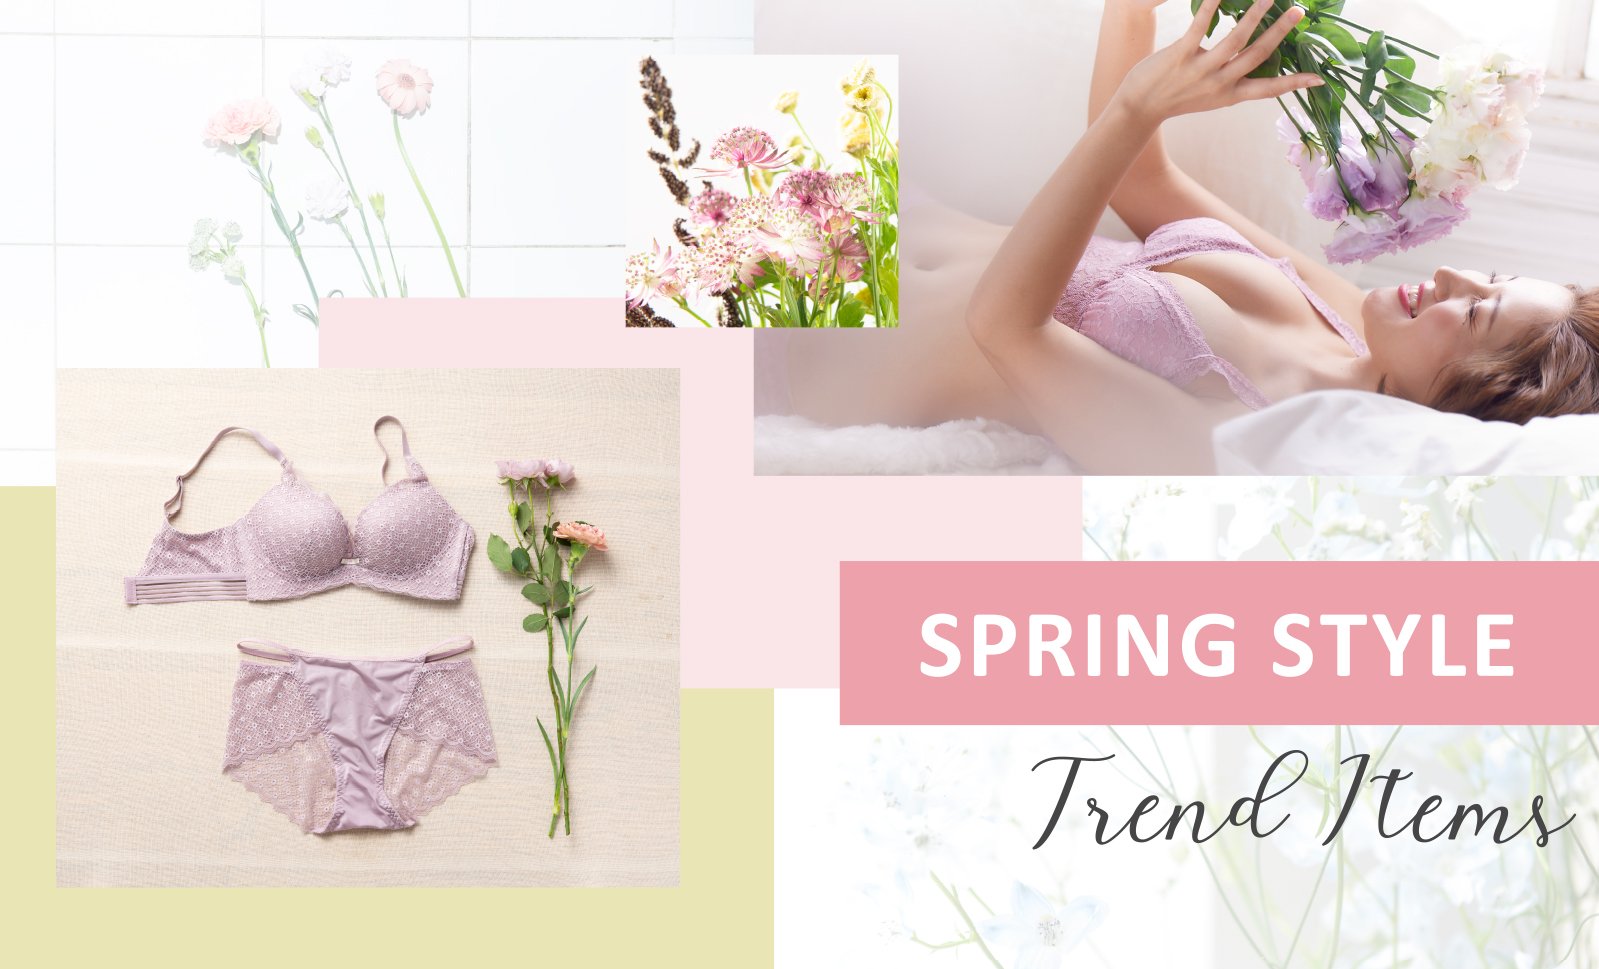 SPRING STYLE Trend Items